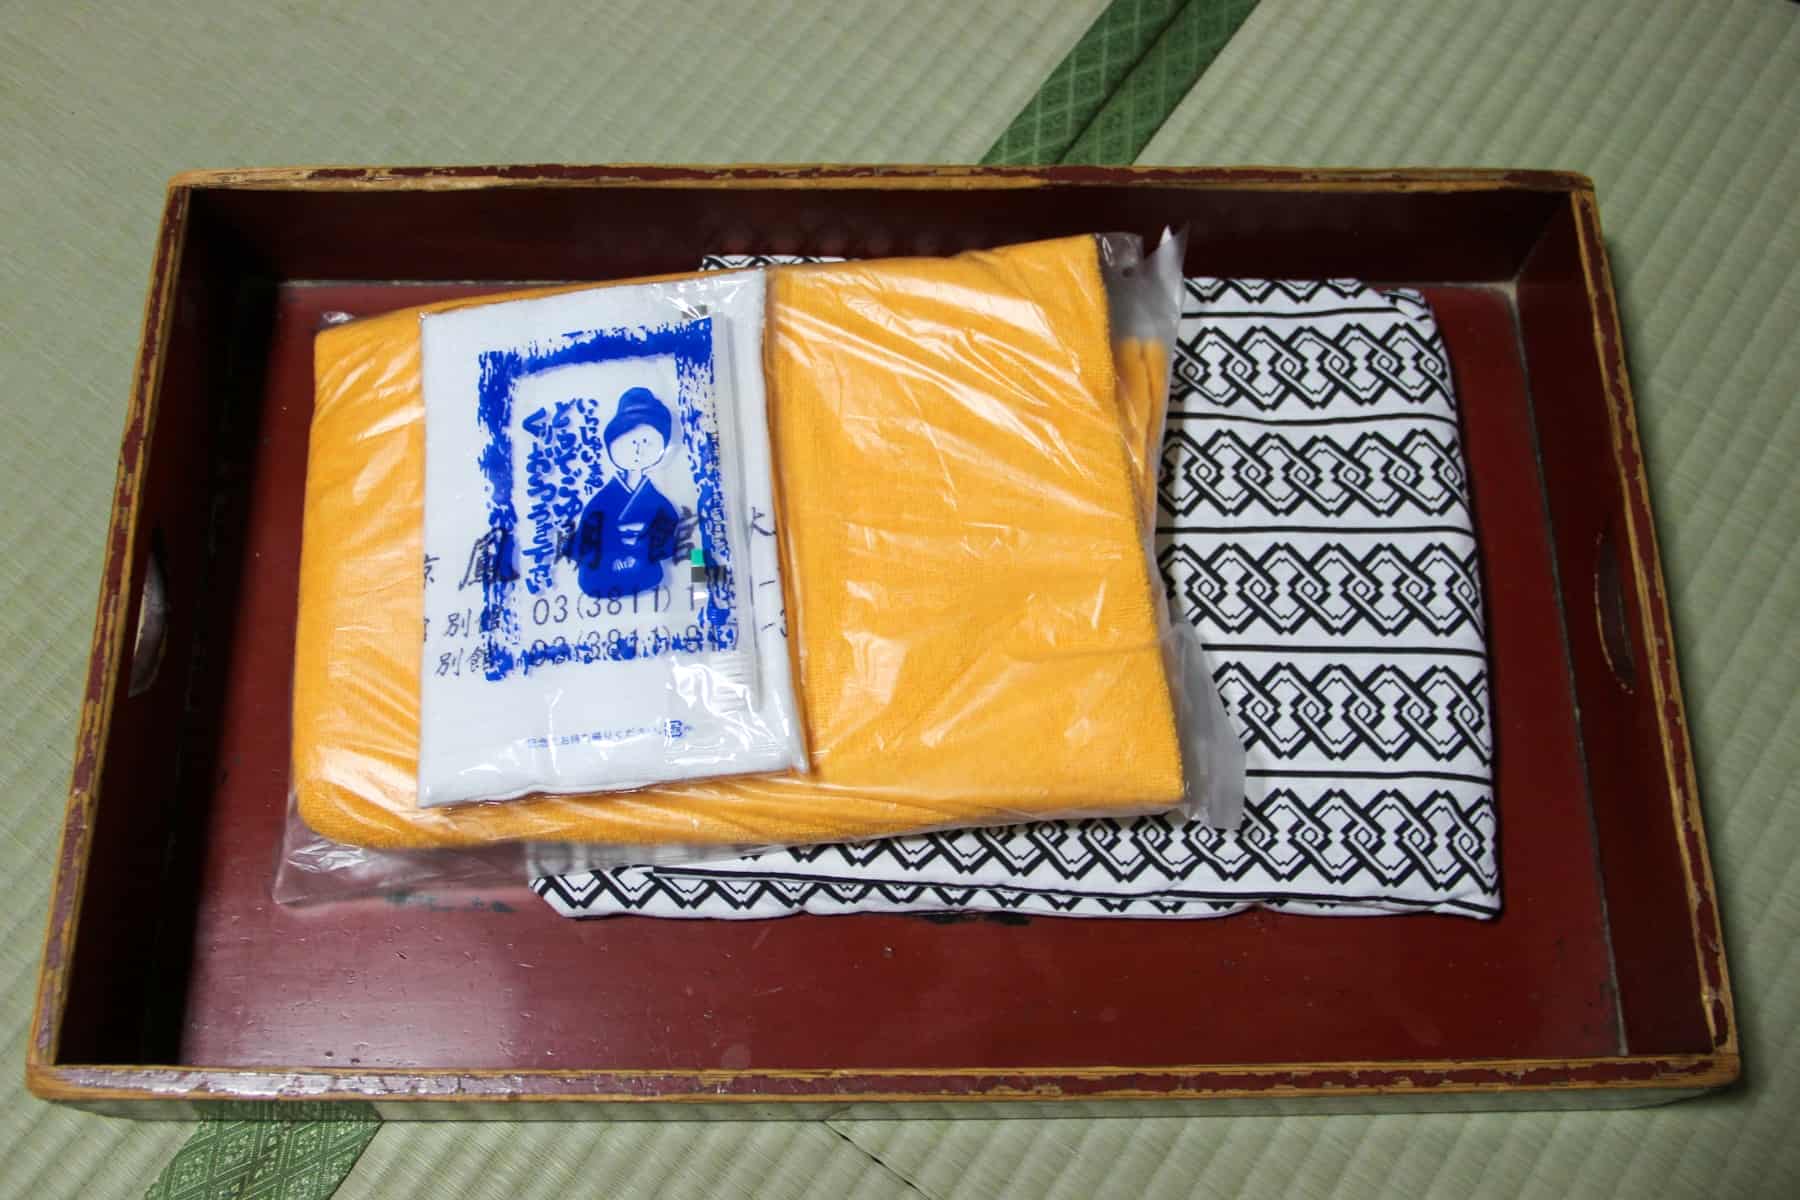 A wooden tray in a Japanese Ryokan room containing a Yukata bathrobe and packaged yellow and white towels.